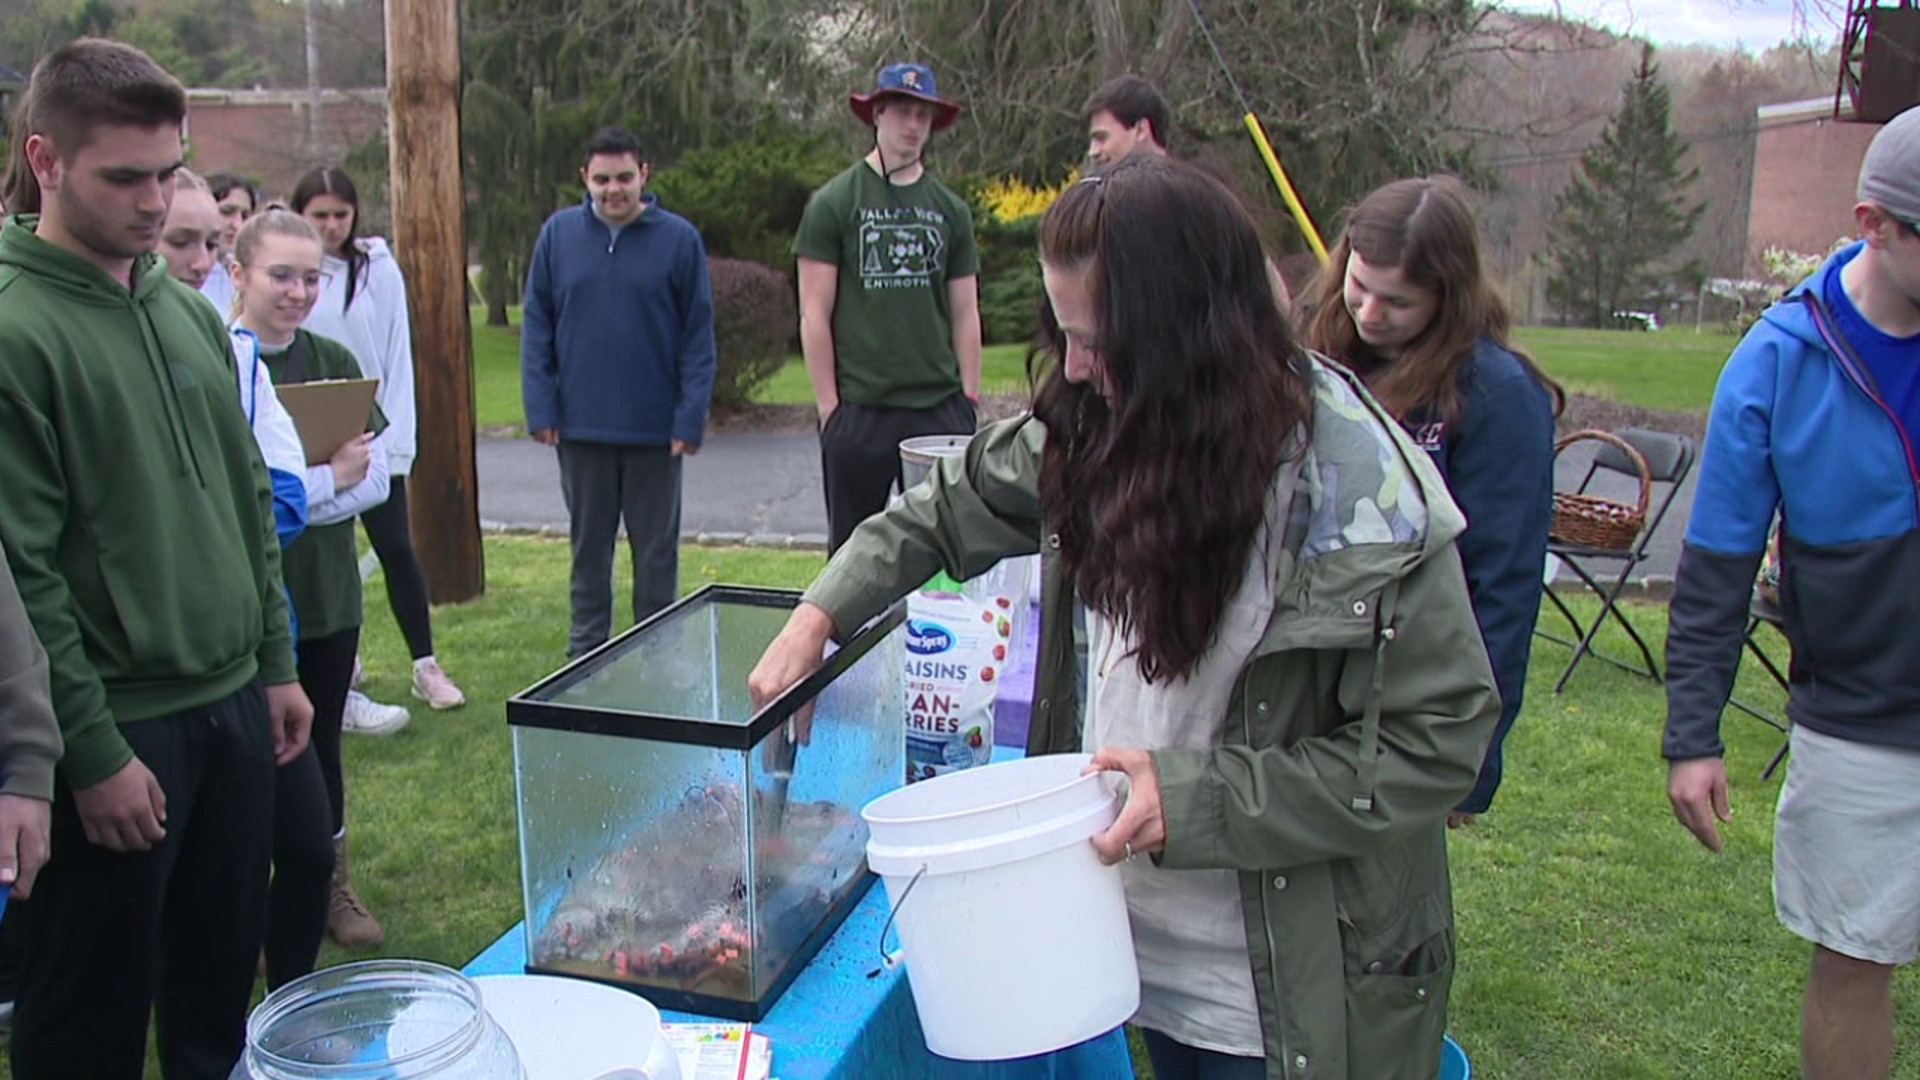 Students celebrated Earth by participating in an environmental-themed competition at Keystone College.